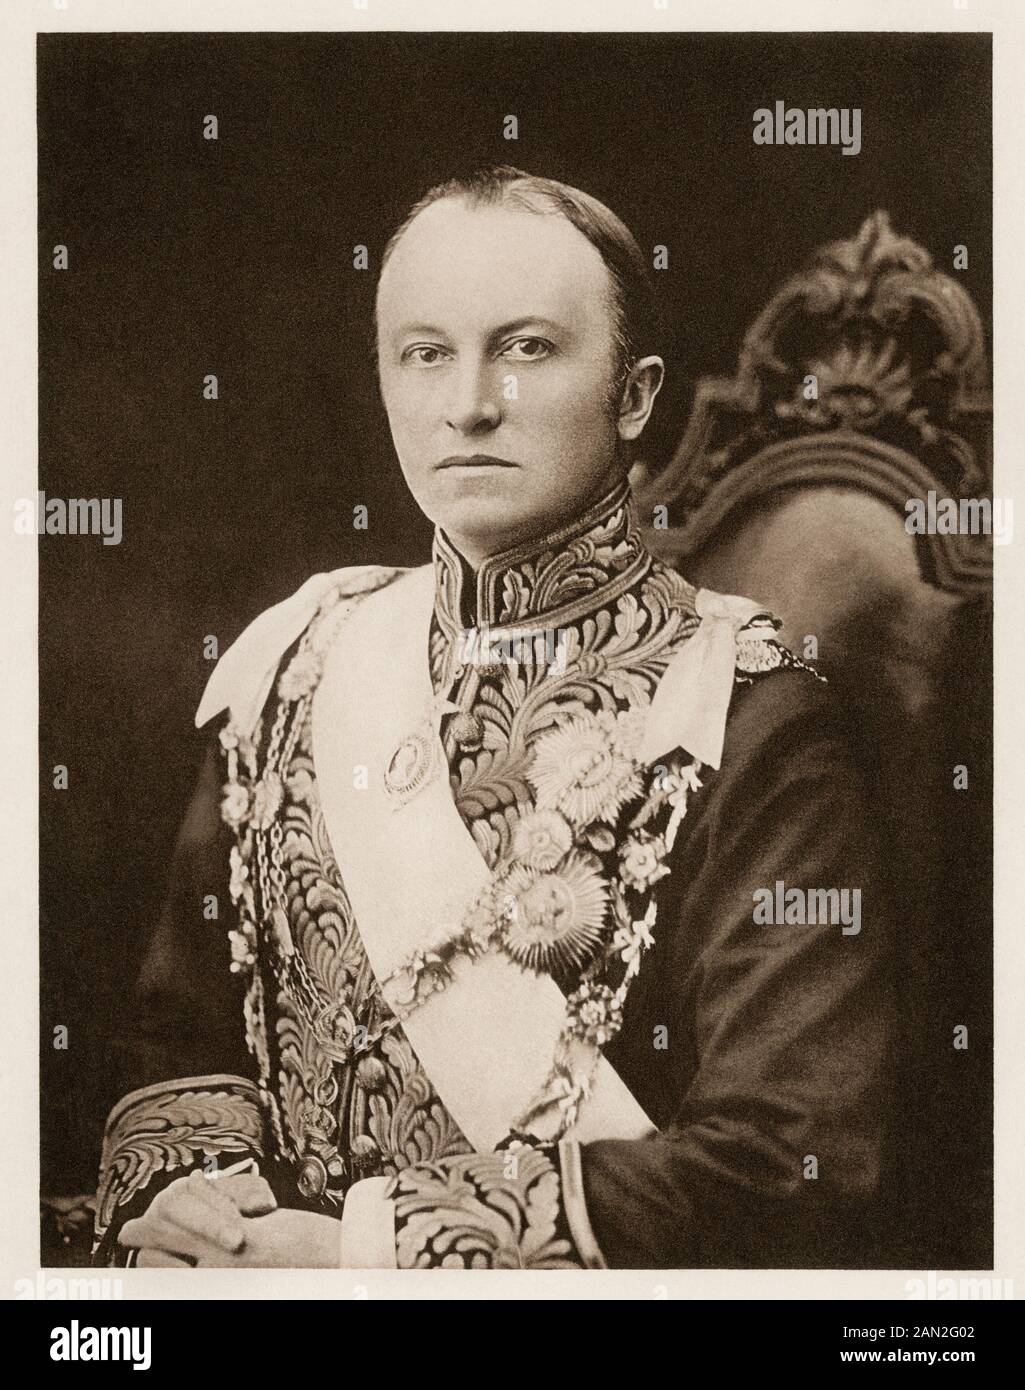 George Nathaniel Curzon, Viceroy of India, early 1900s. Photogravure Stock Photo